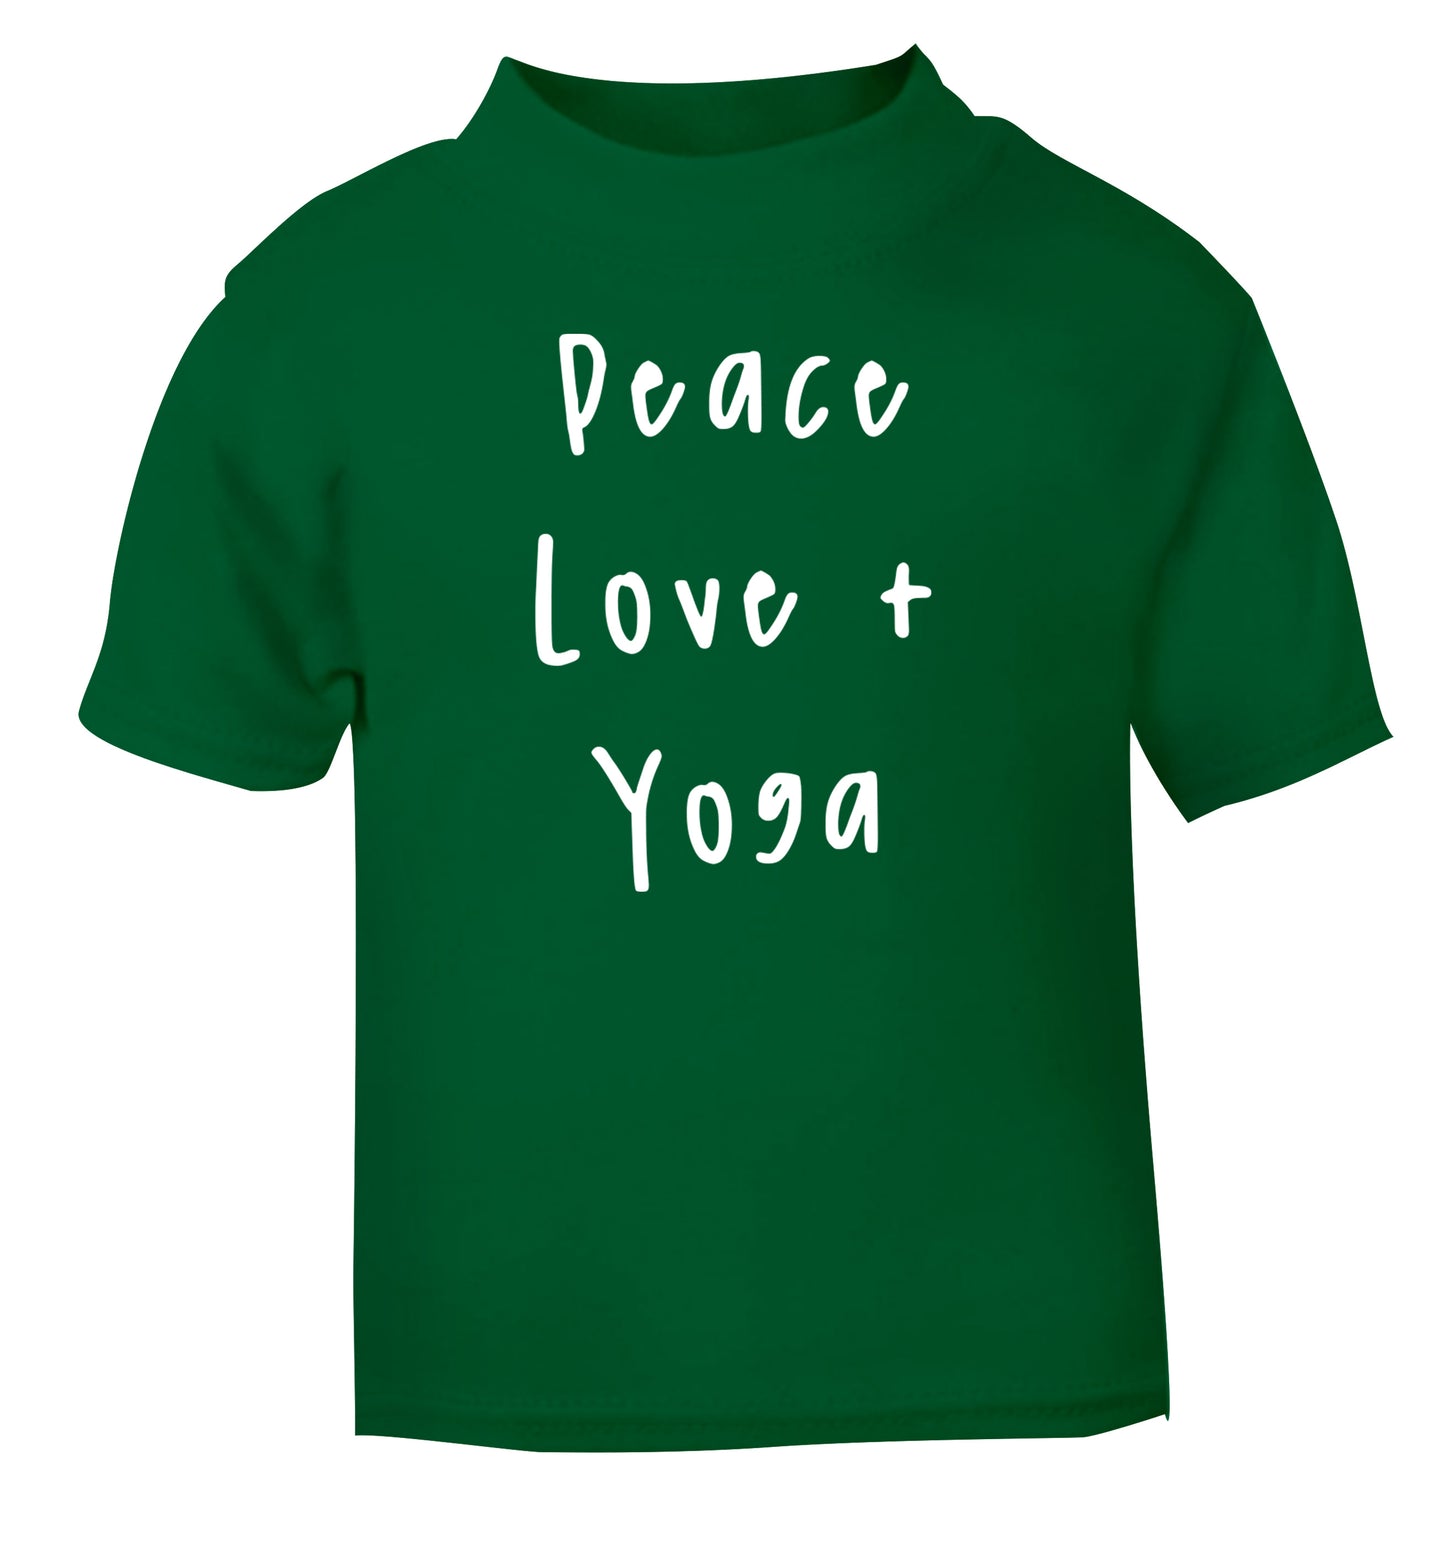 Peace love and yoga green Baby Toddler Tshirt 2 Years